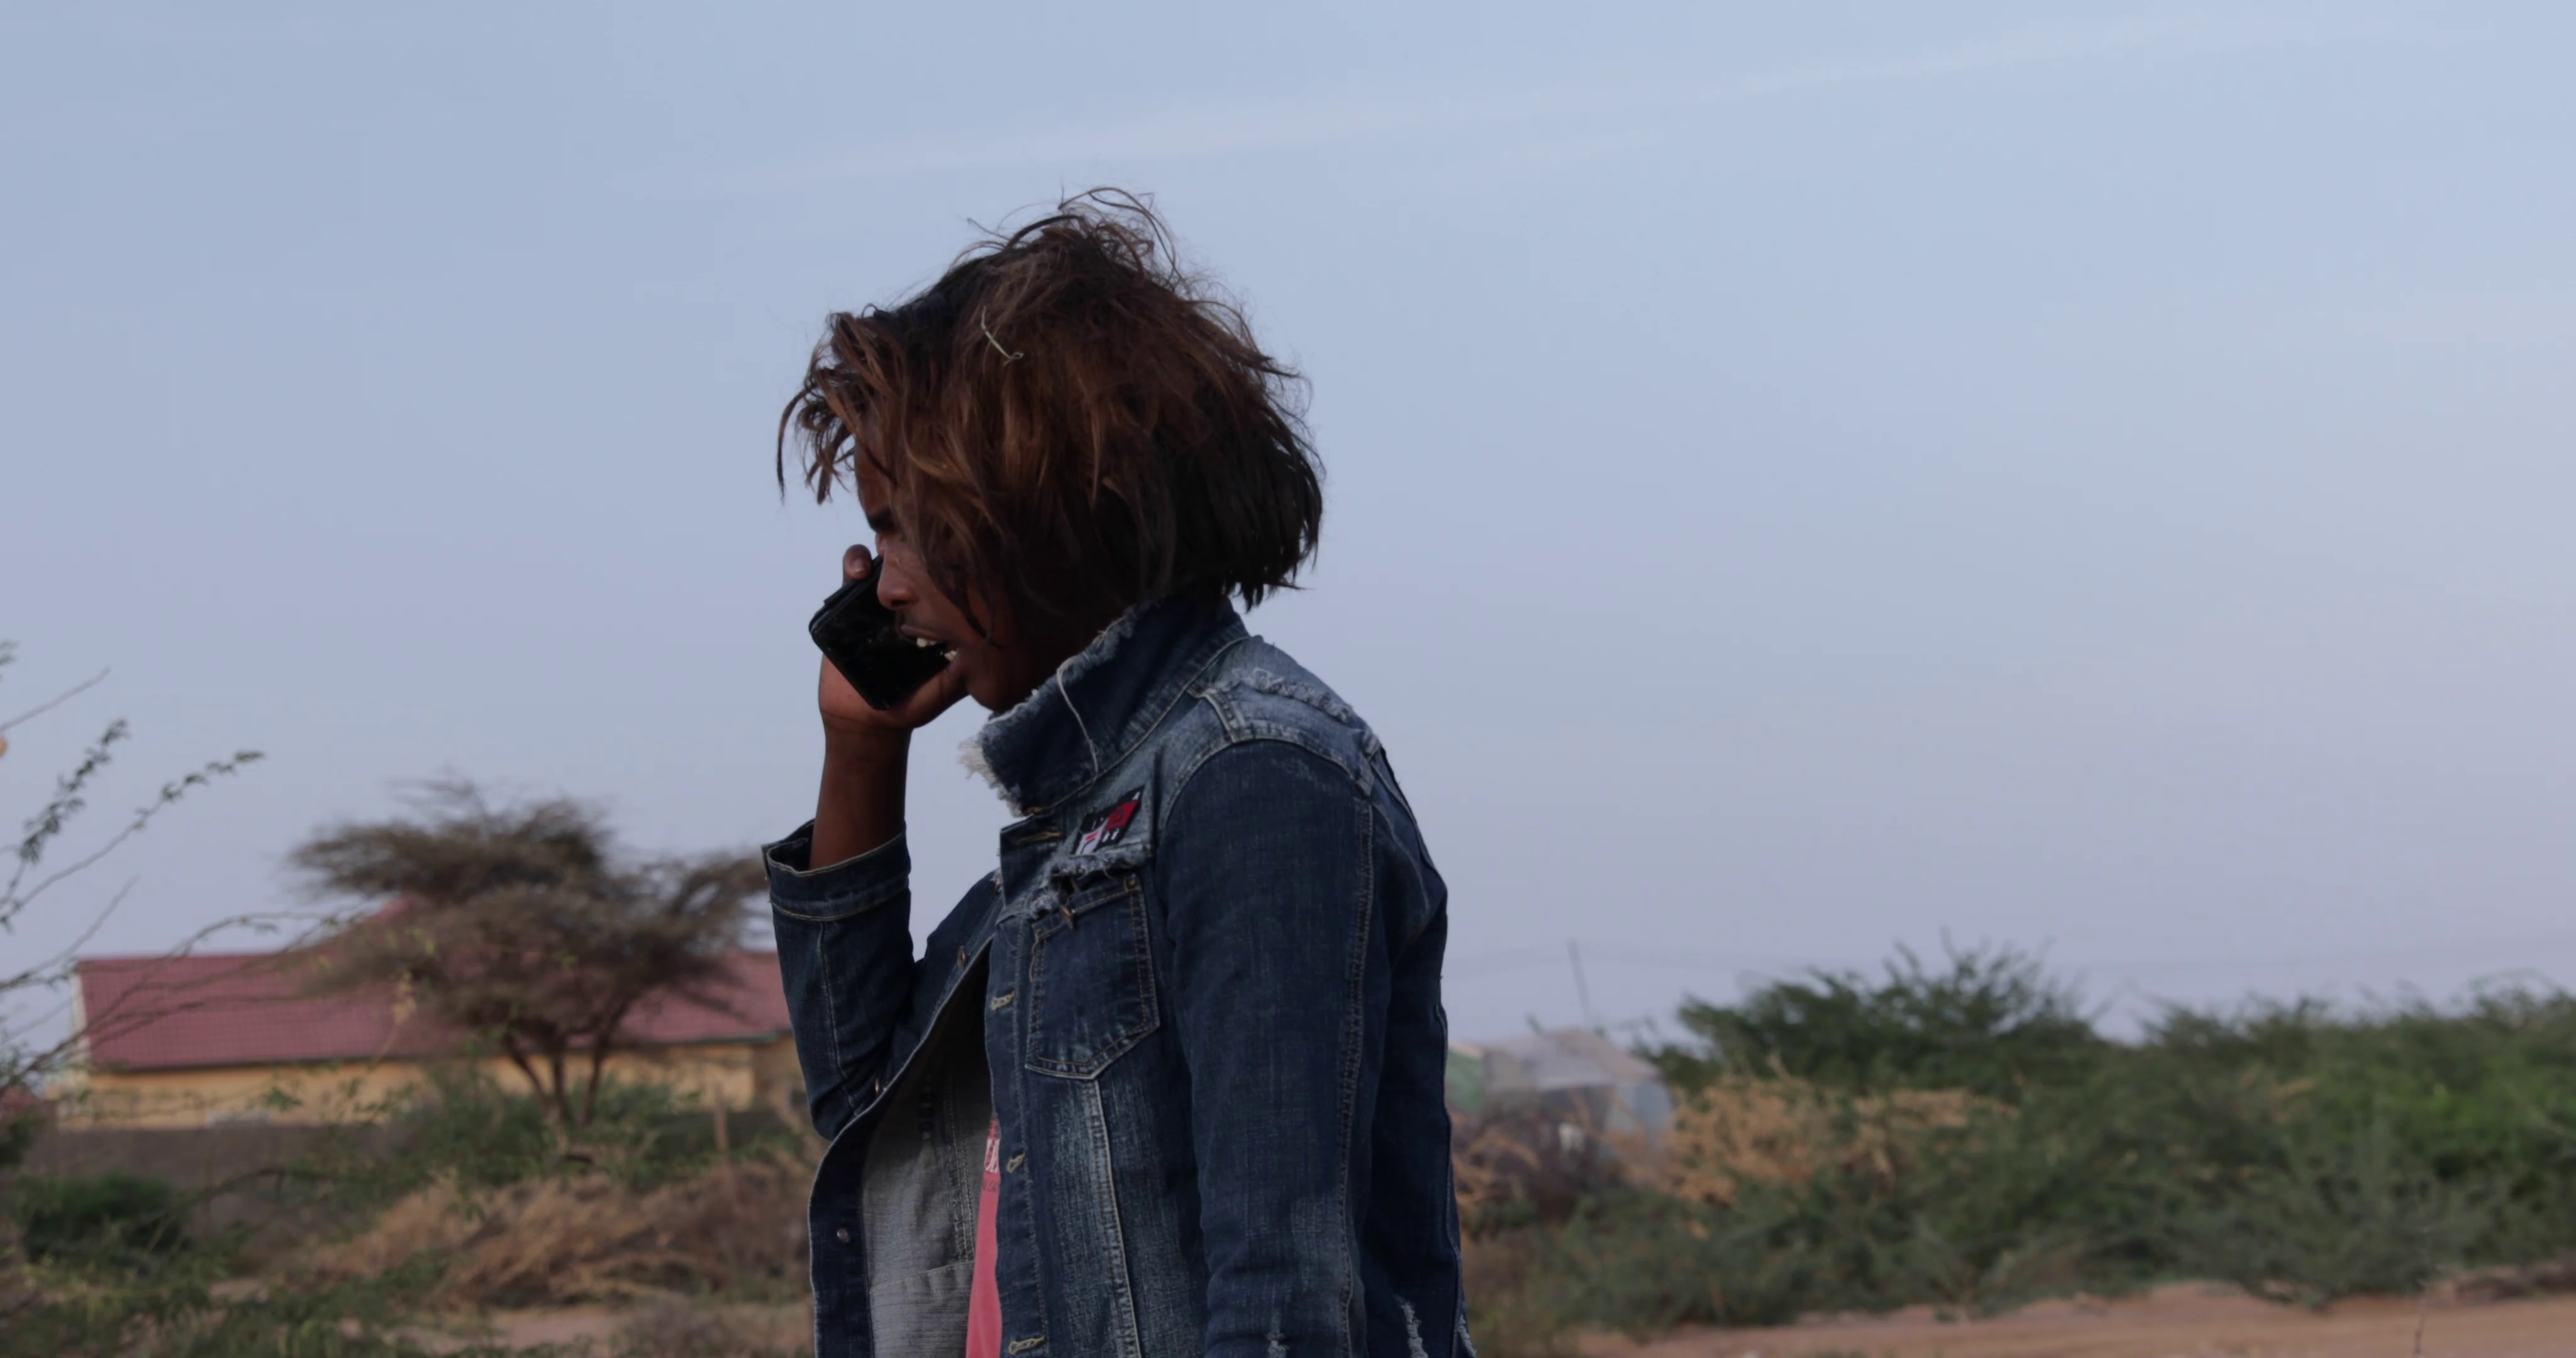 Somali returnees produce a film which re-enacts their experiences travelling to Libya irregularly and showcases the dangers of their journey. The returnees hope that by showing this film  locally that it raises awareness to the dangerous of irregular migration.